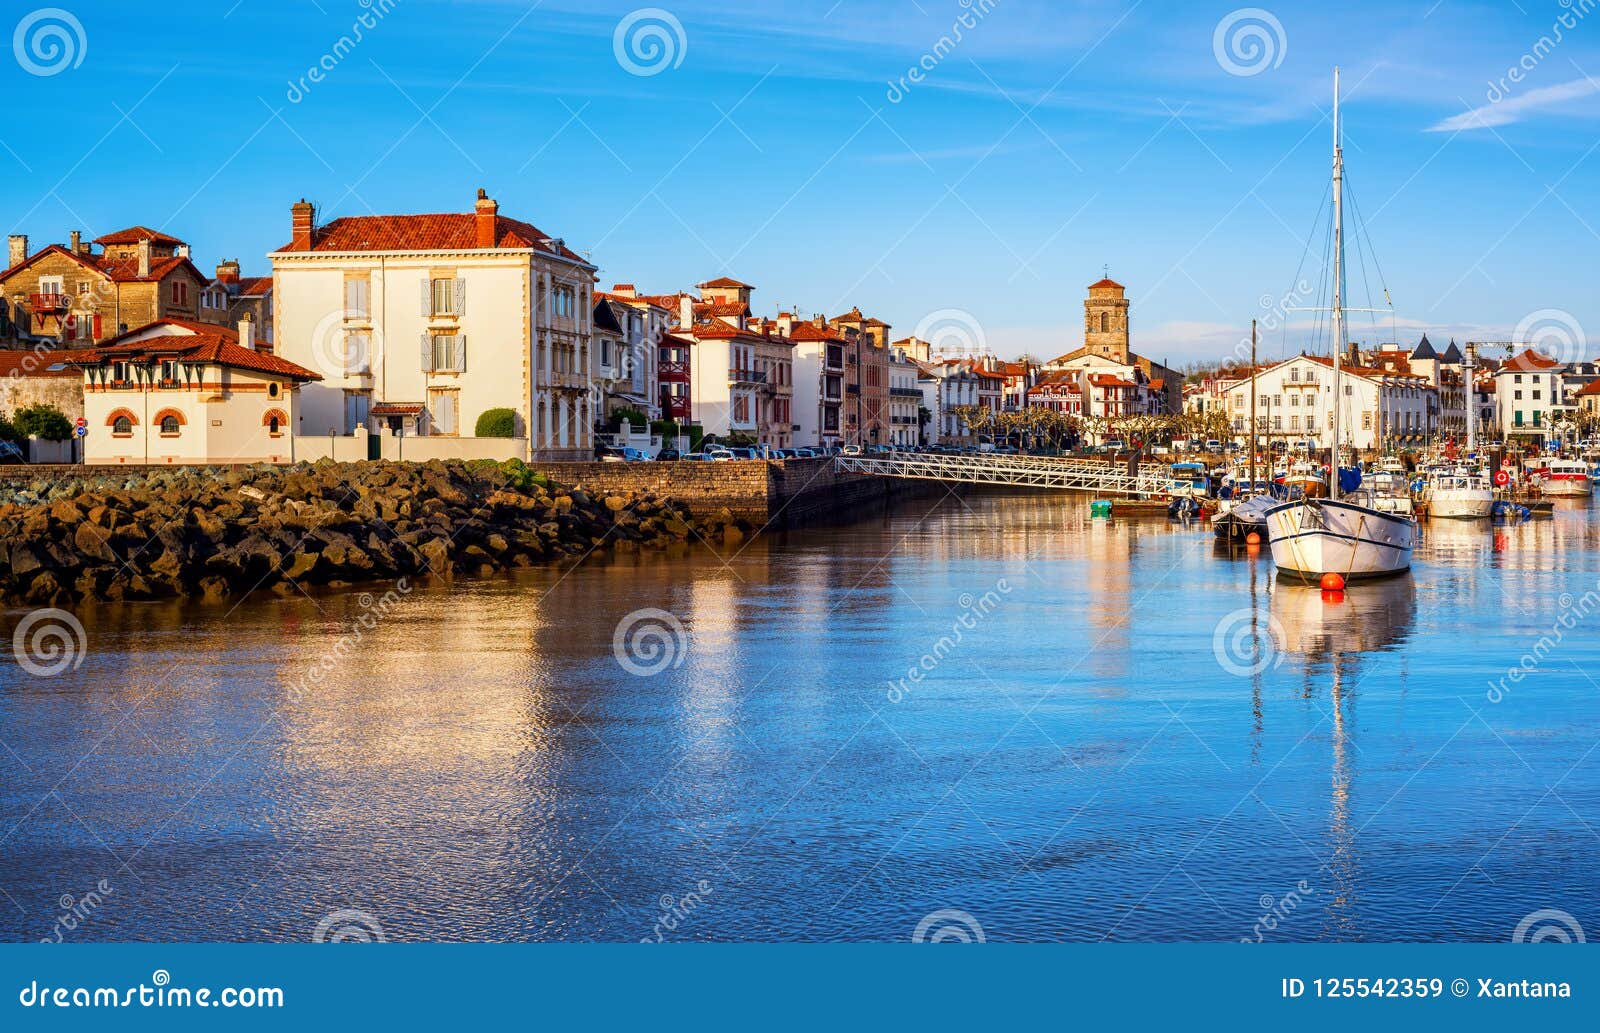 st jean de luz old town and port, basque country, france